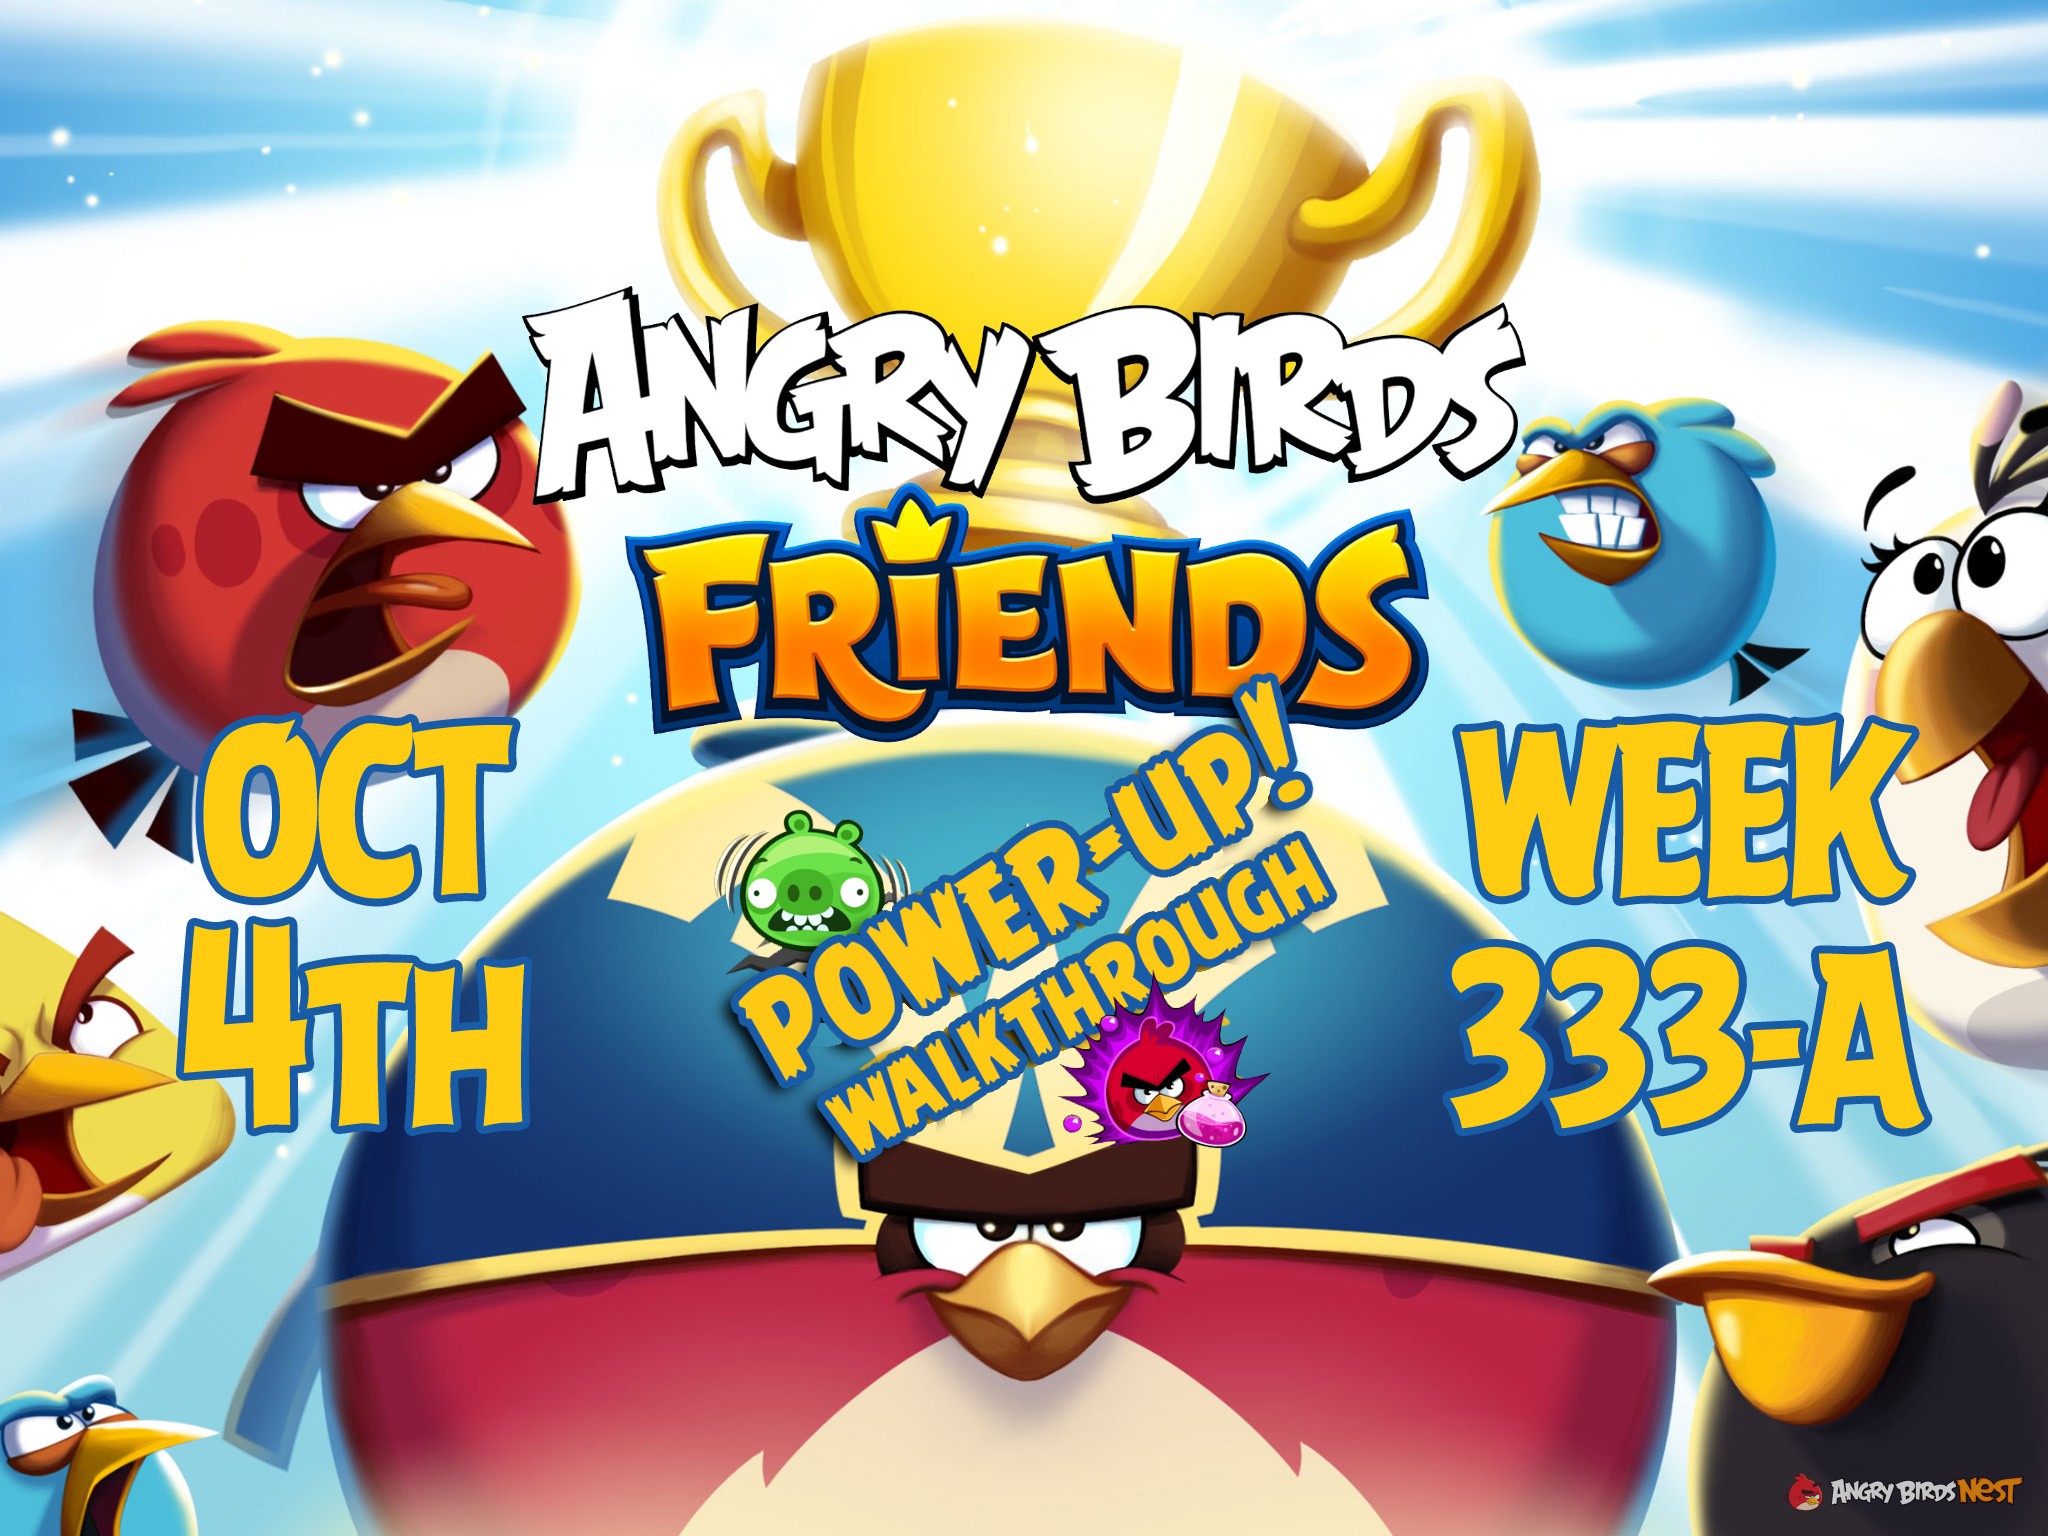 Angry-Birds-Friends-Tournament-Week-333-A-Feature-Image-PU